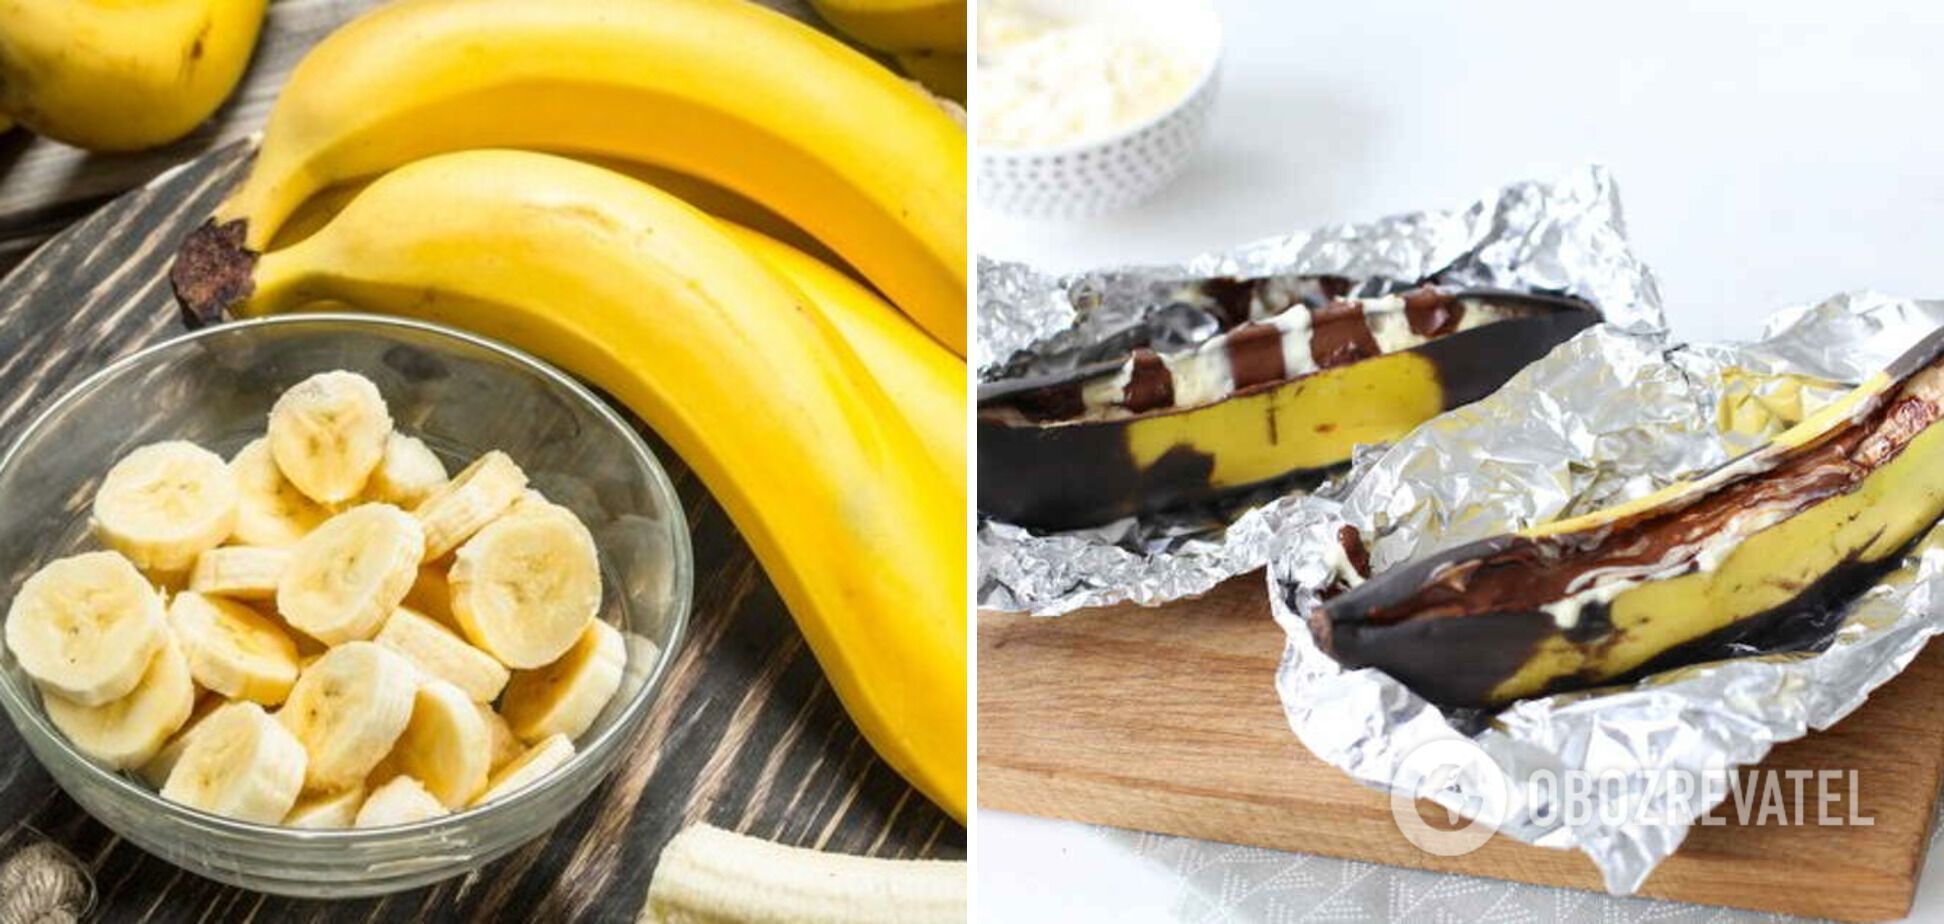 How to bake bananas in the oven